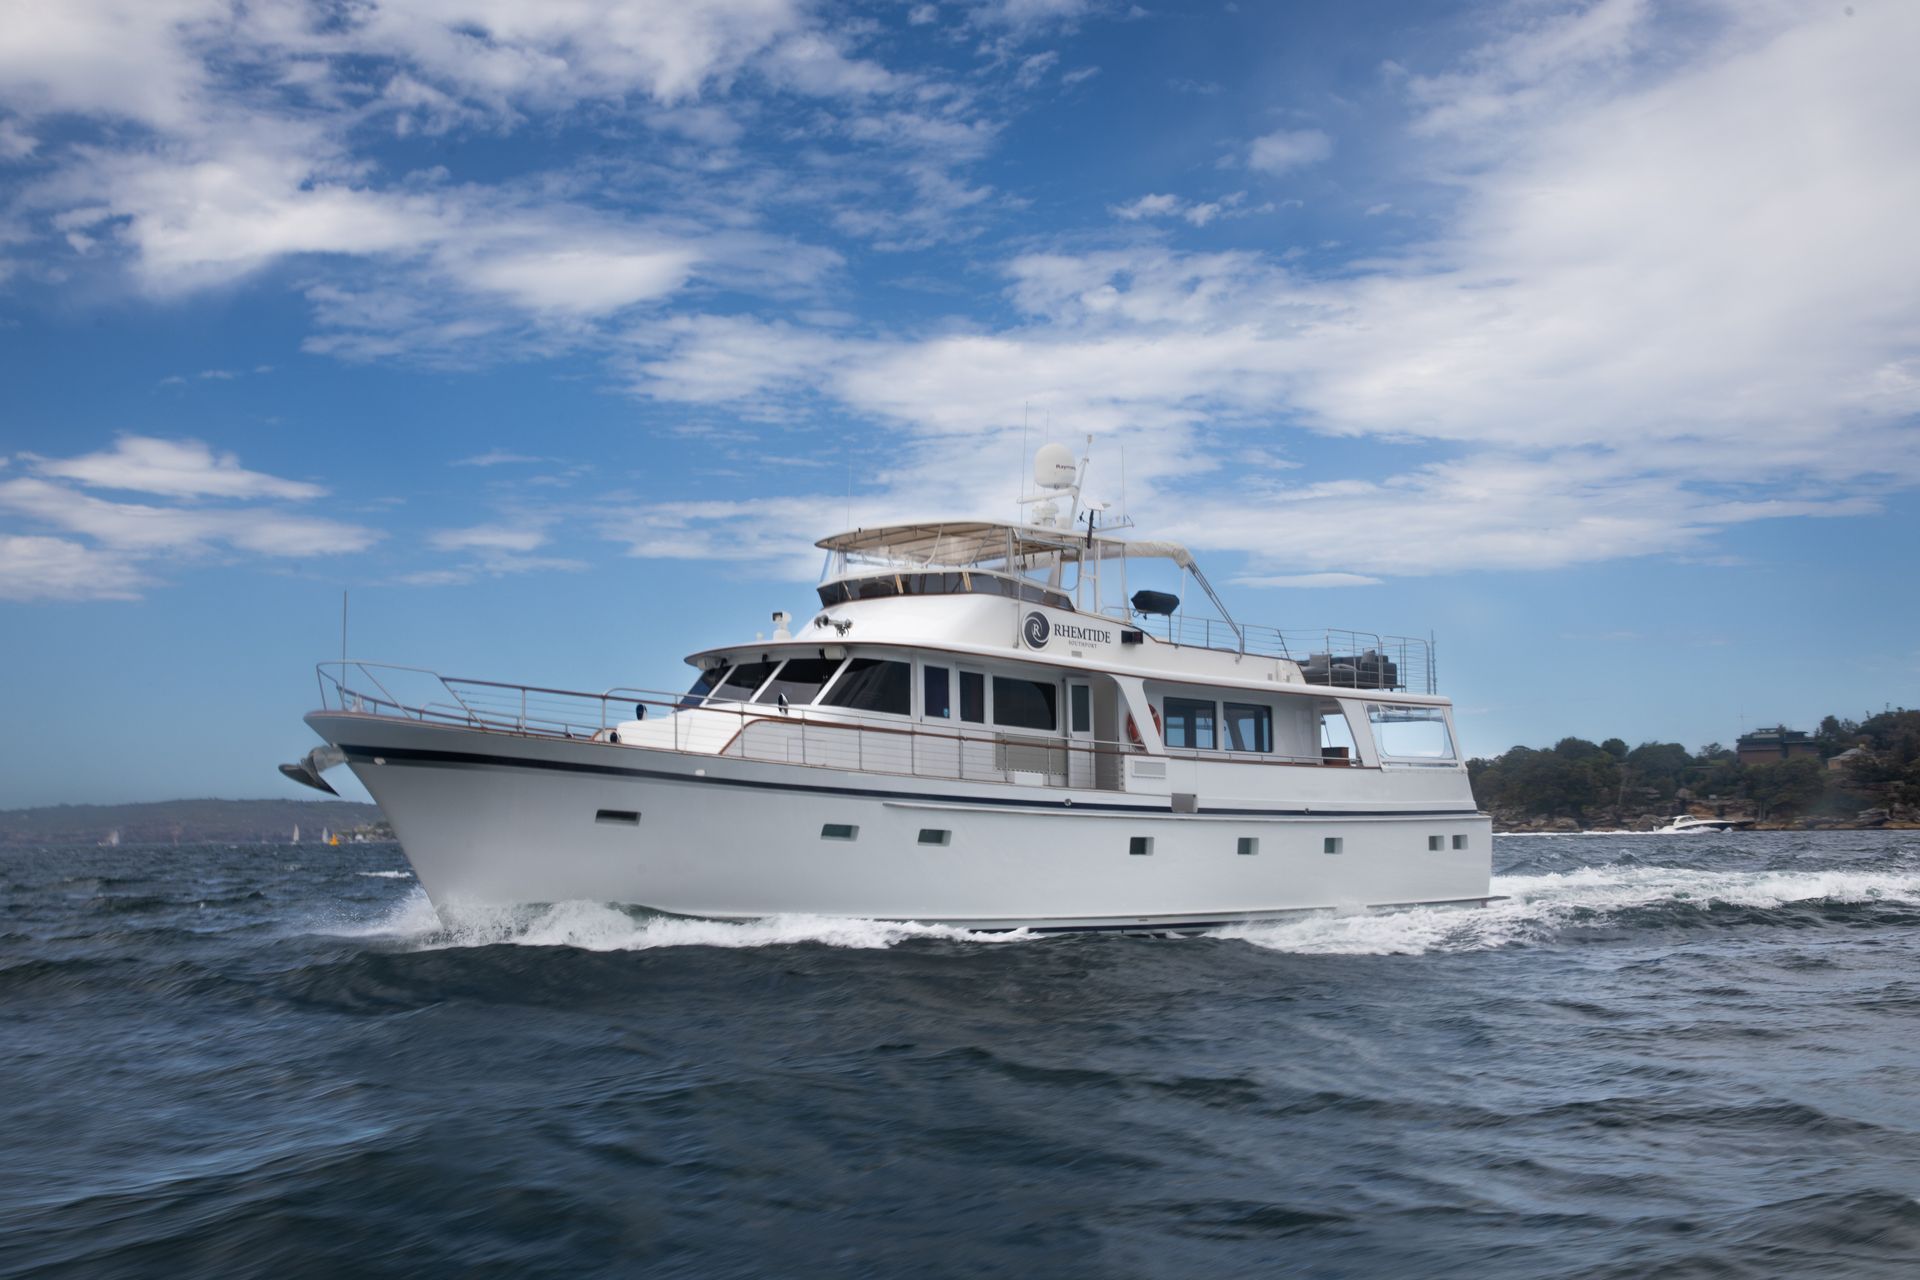 RHEMTIDE | From $990 per hour | 42 guests